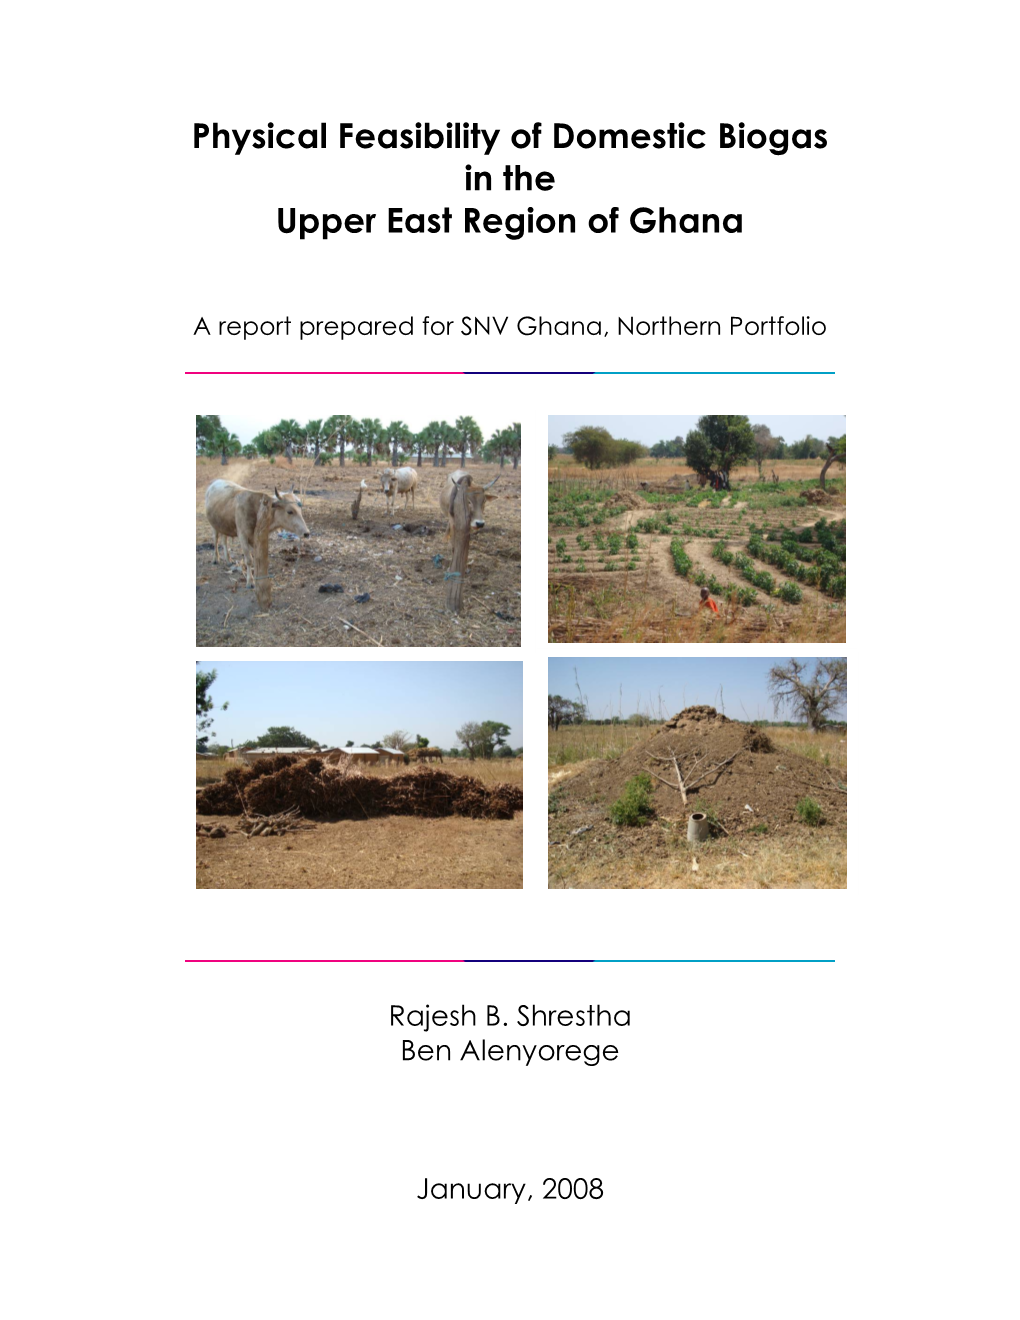 Physical Feasibility of Domestic Biogas in the Upper East Region of Ghana